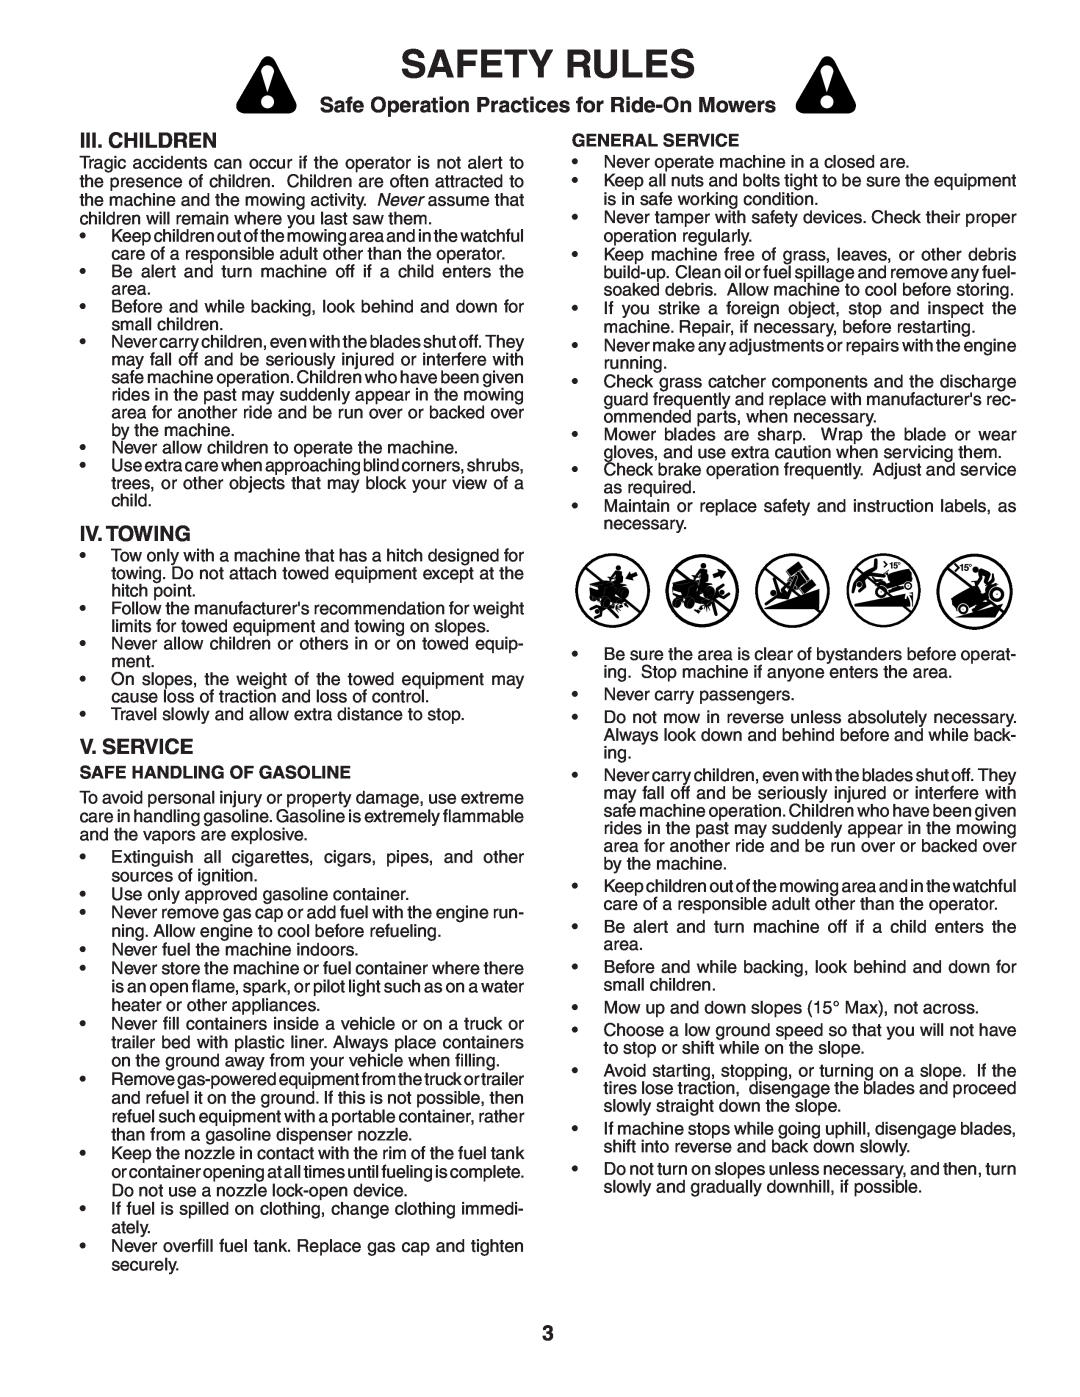 Poulan PBGT27H54 manual Iii. Children, Iv. Towing, V. Service, Safety Rules, Safe Operation Practices for Ride-OnMowers 